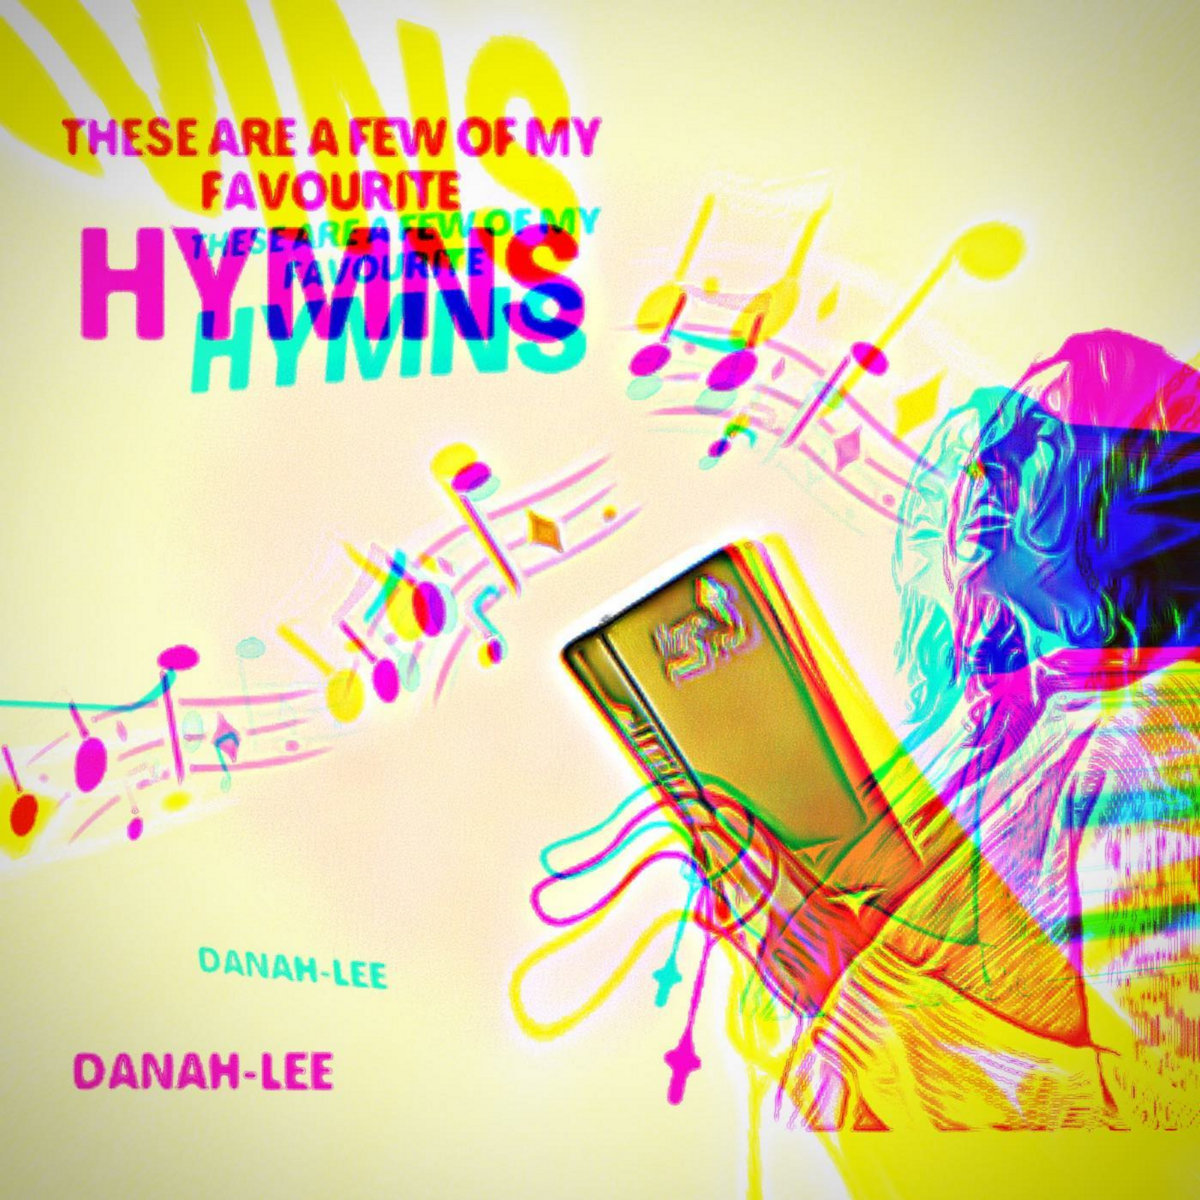 Danah-Lee - These Are a Few of My Favourite Hymns